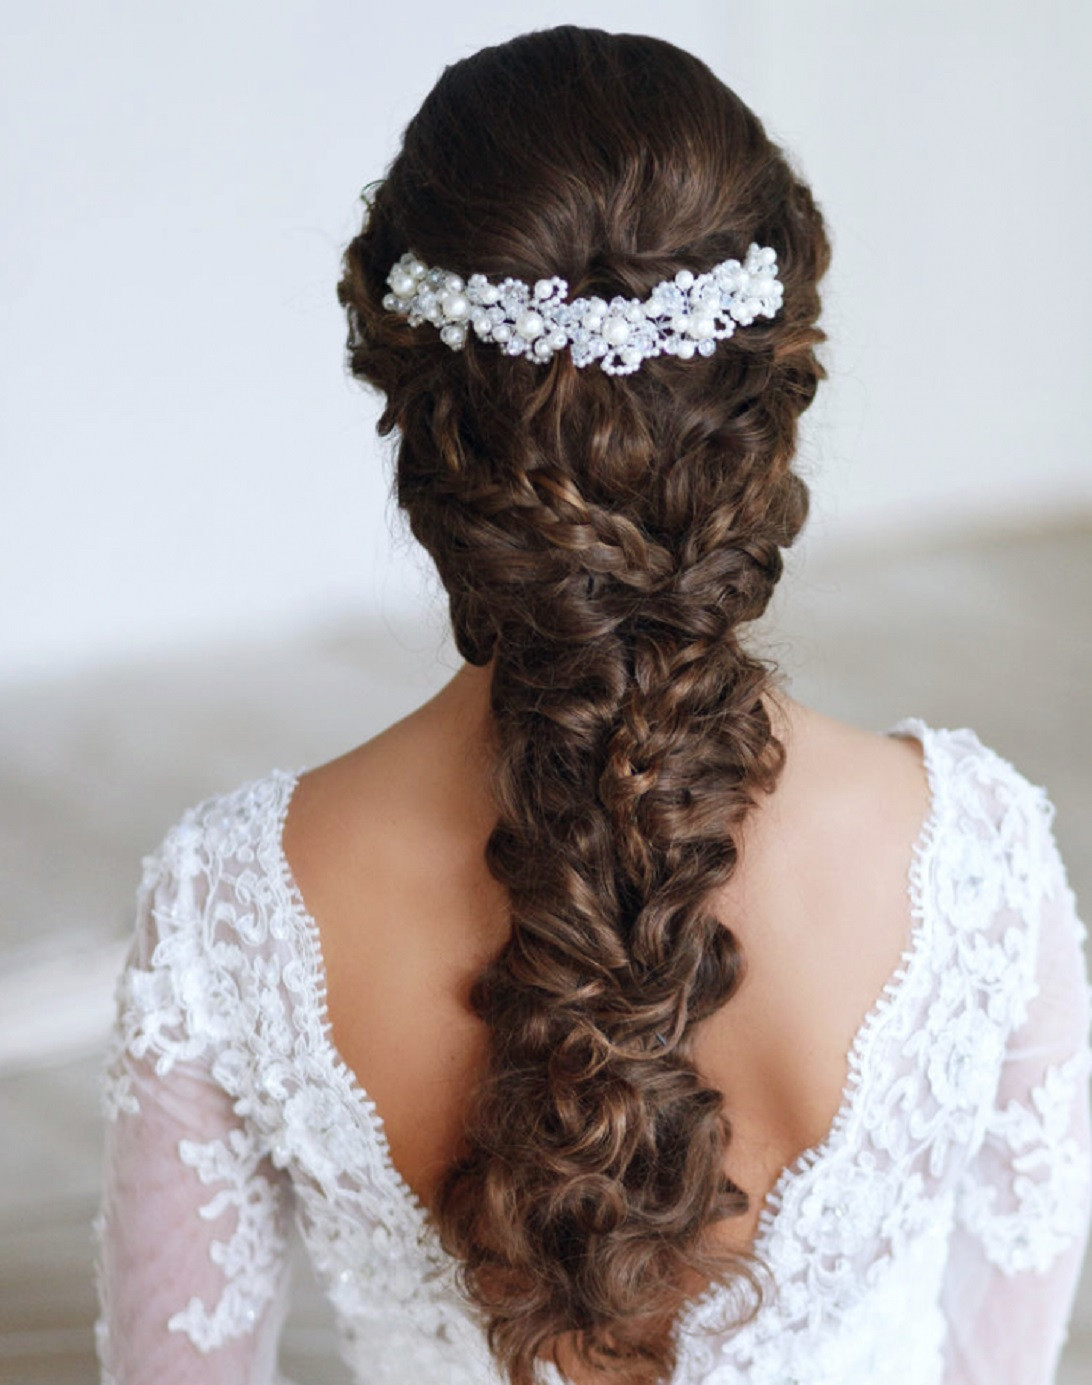 Bridesmaid Braided Hairstyles
 6 Bridal Hairstyle Tips for Your Big day